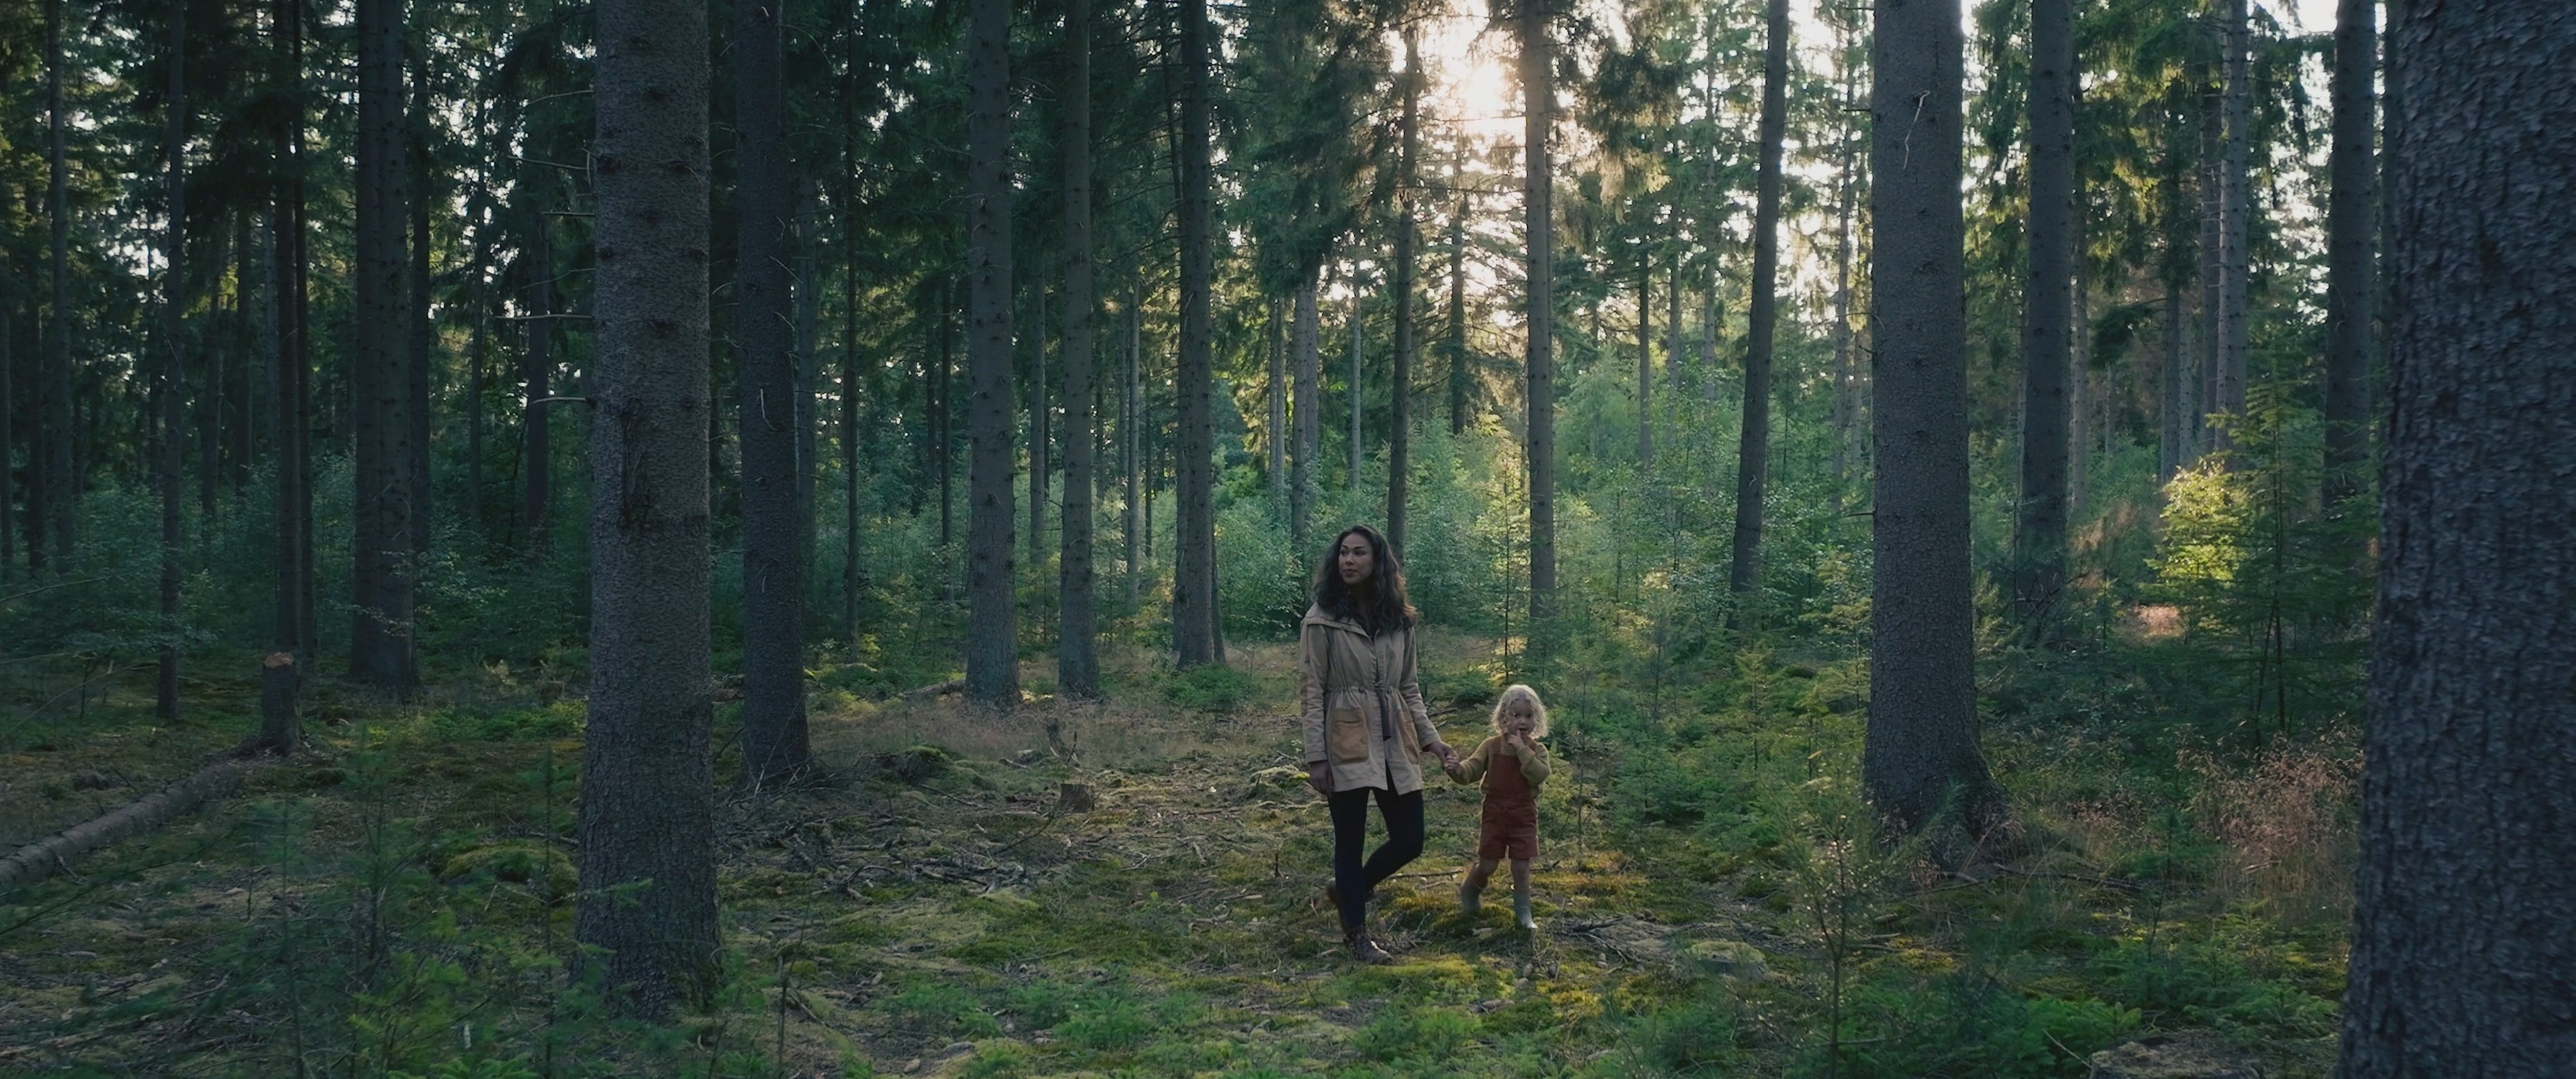 Tidal Vision Mother and Child in the Woods